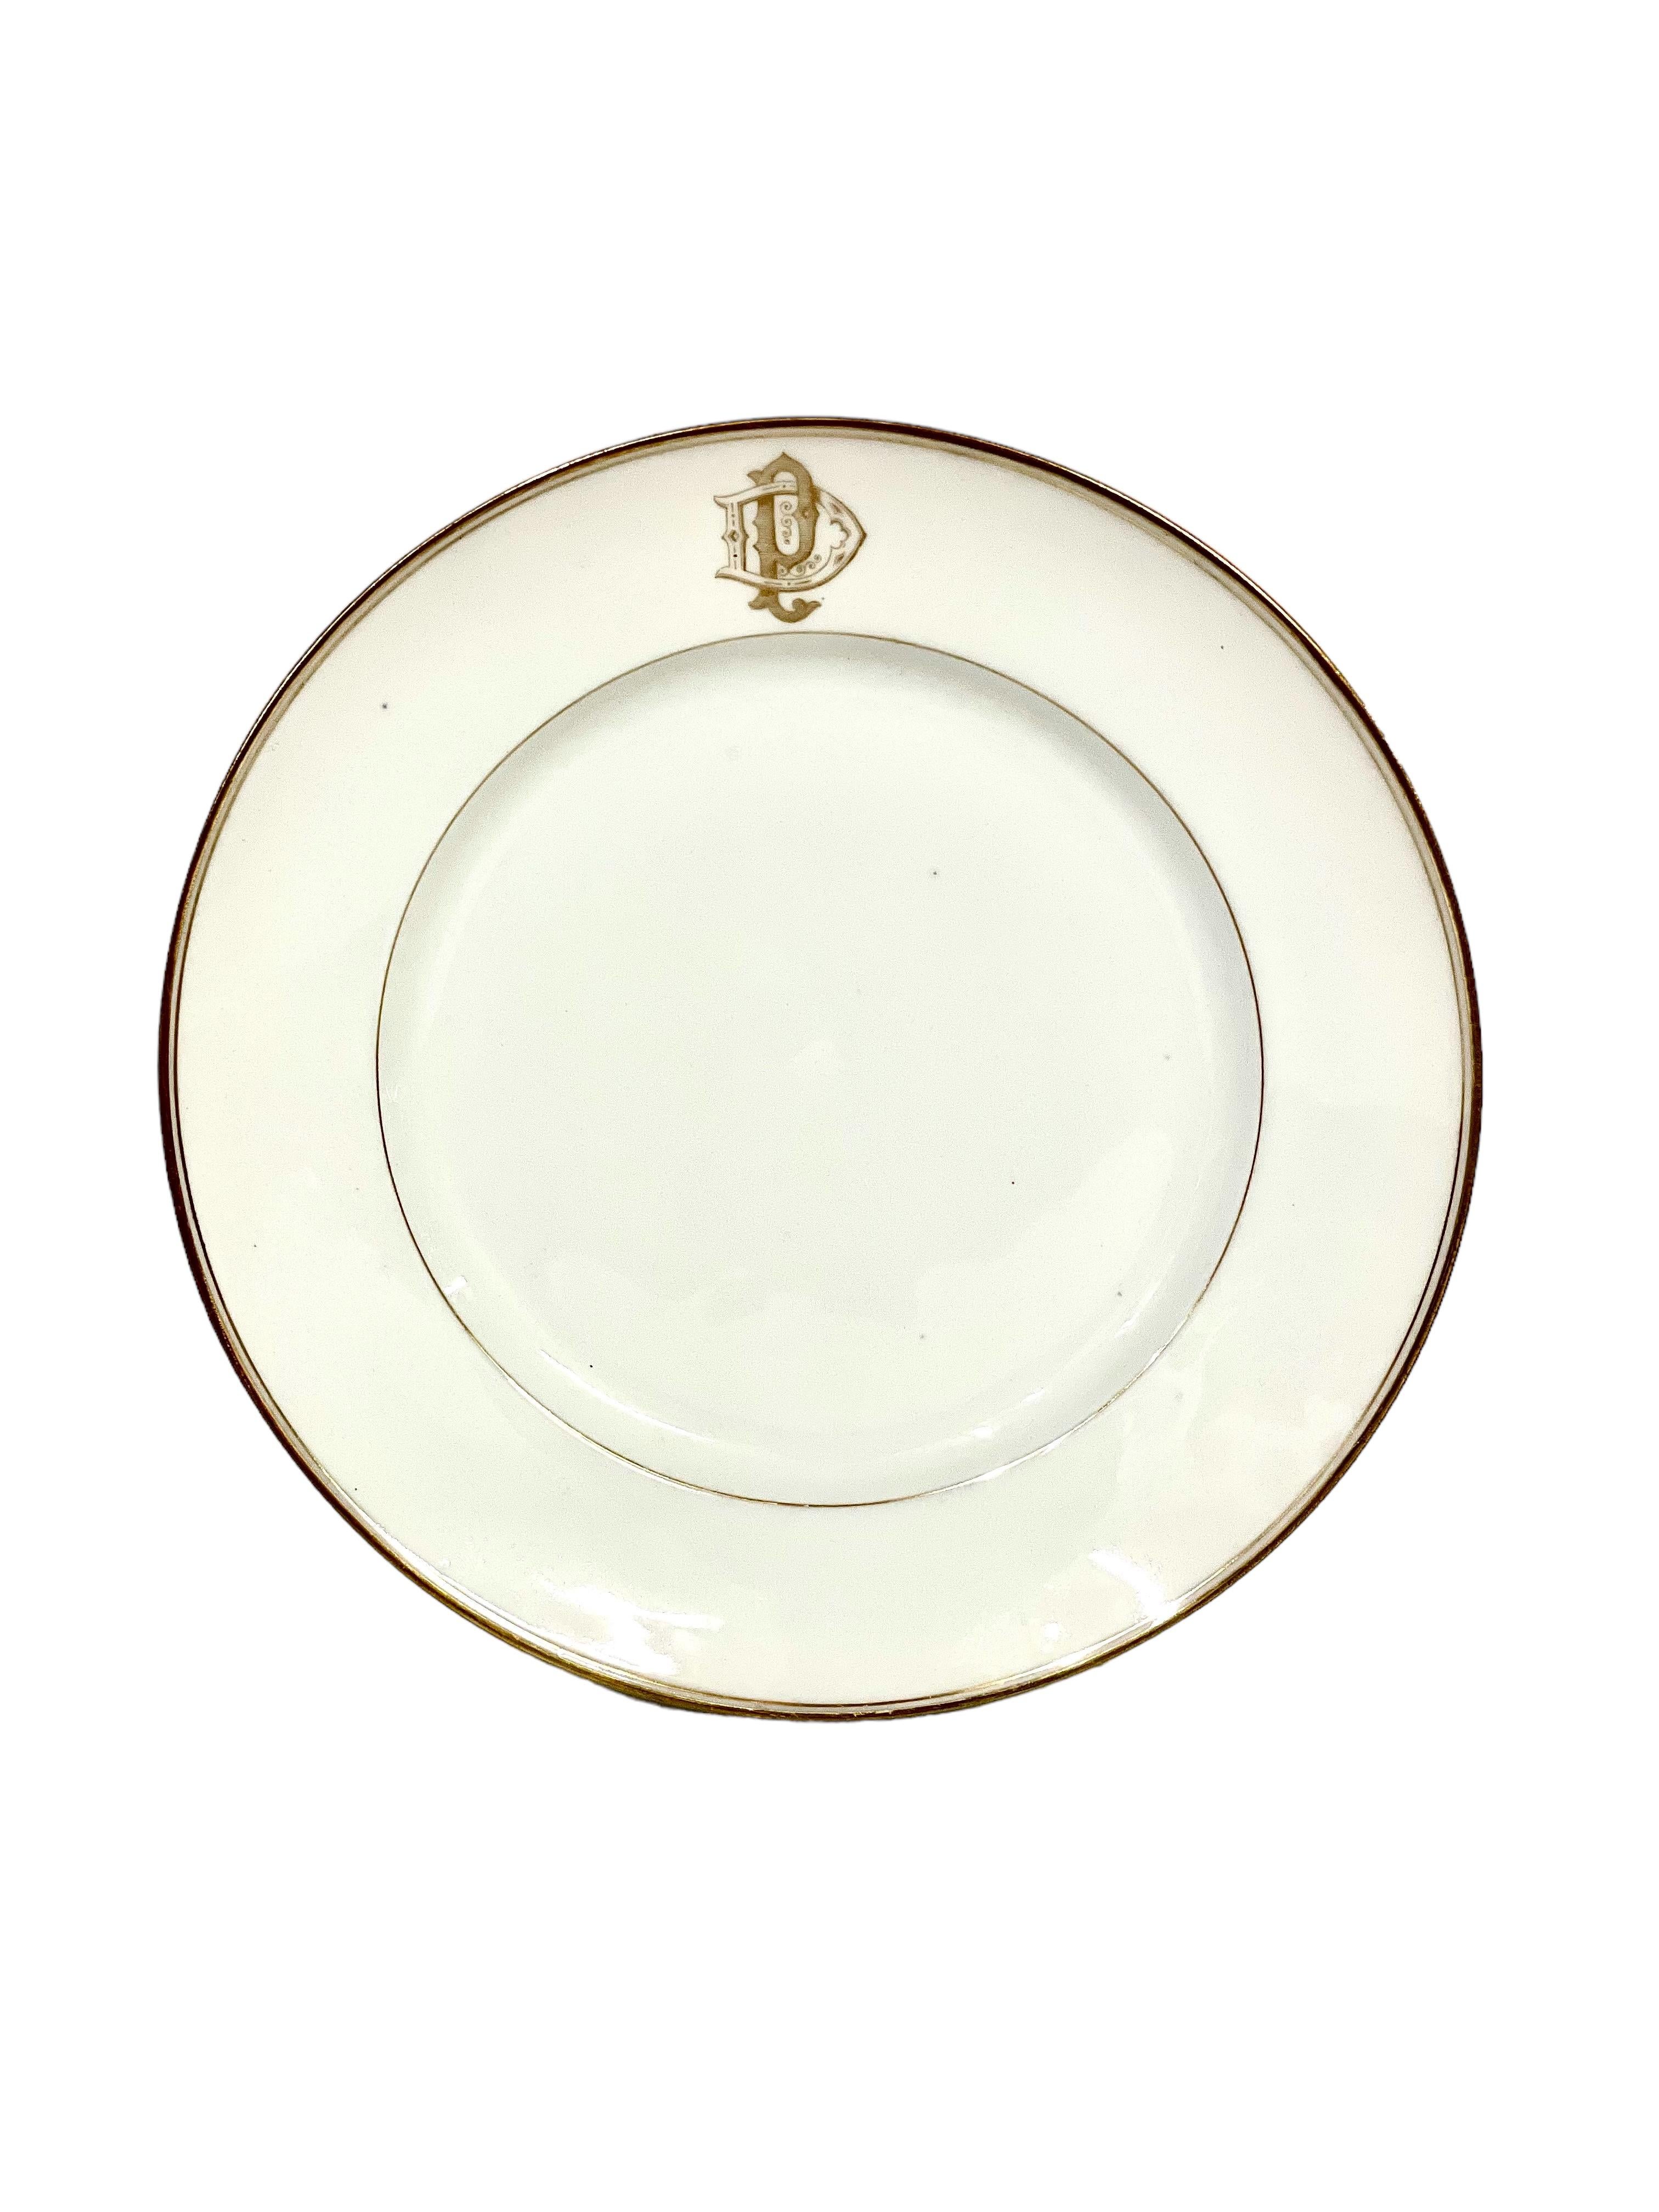 Louis XVI Limoges Porcelain Set of 12 Dinner Plates with Gilt Edges and Monogramme For Sale